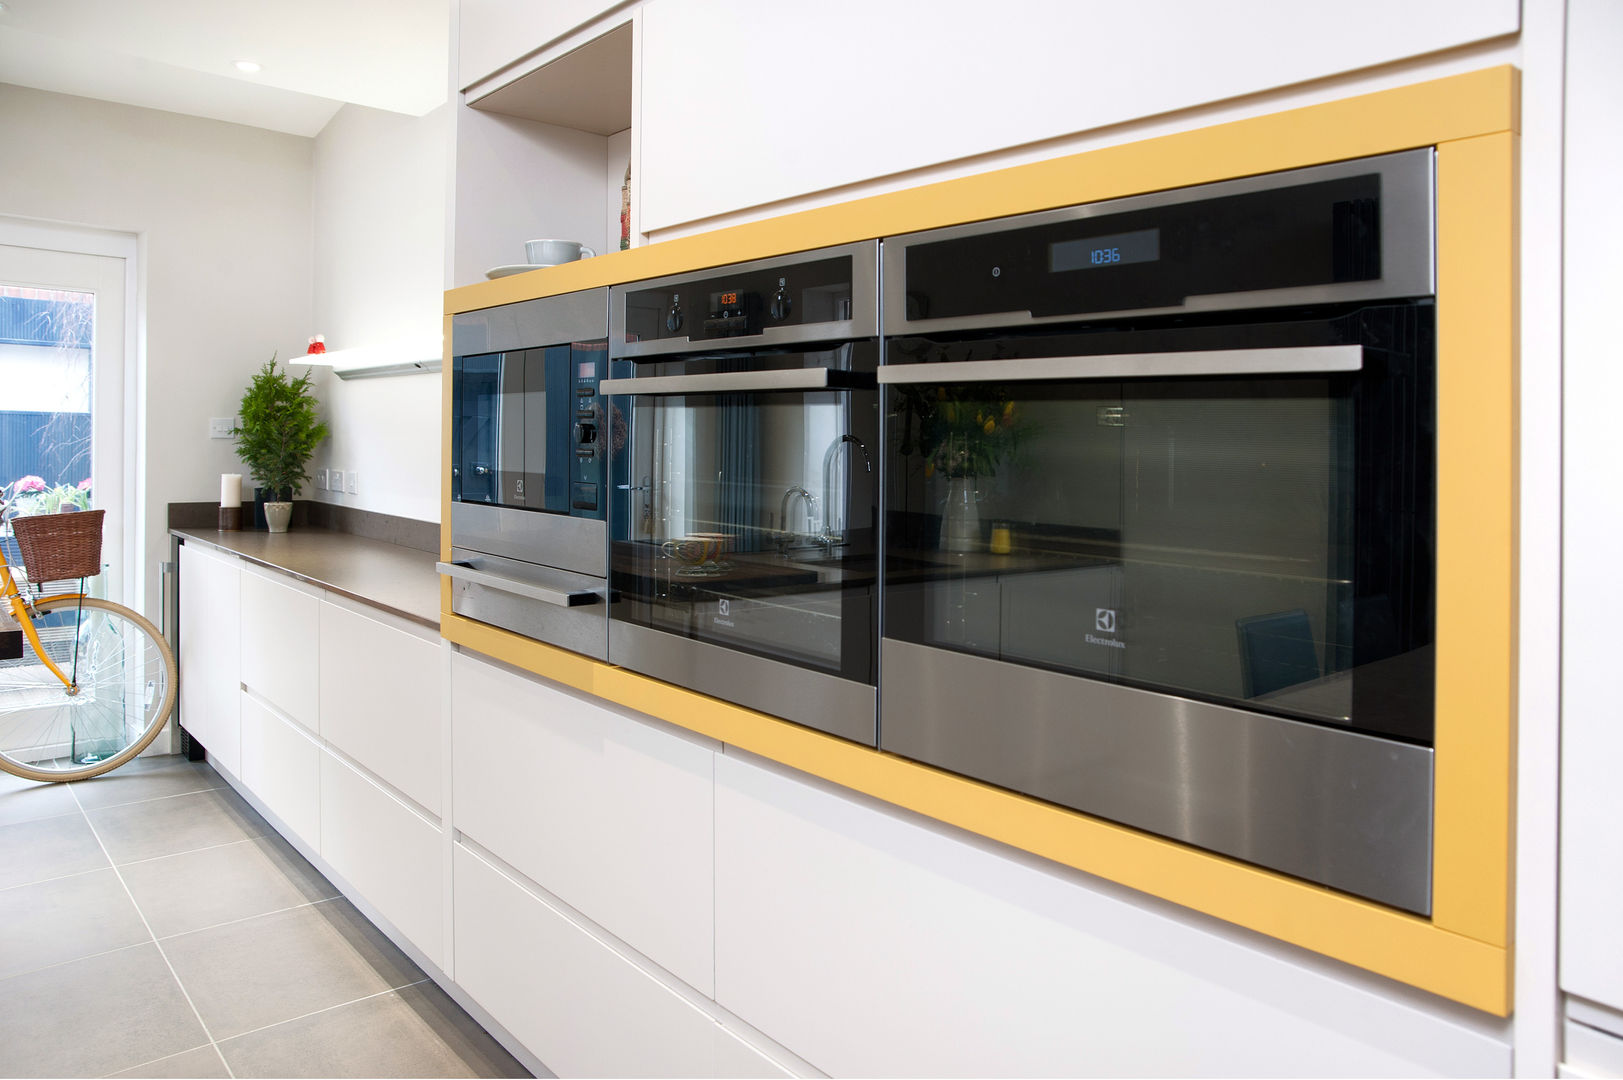 Electrolux appliances wrapped in Curry Yellow panelling Haus12 Interiors Cuisine moderne